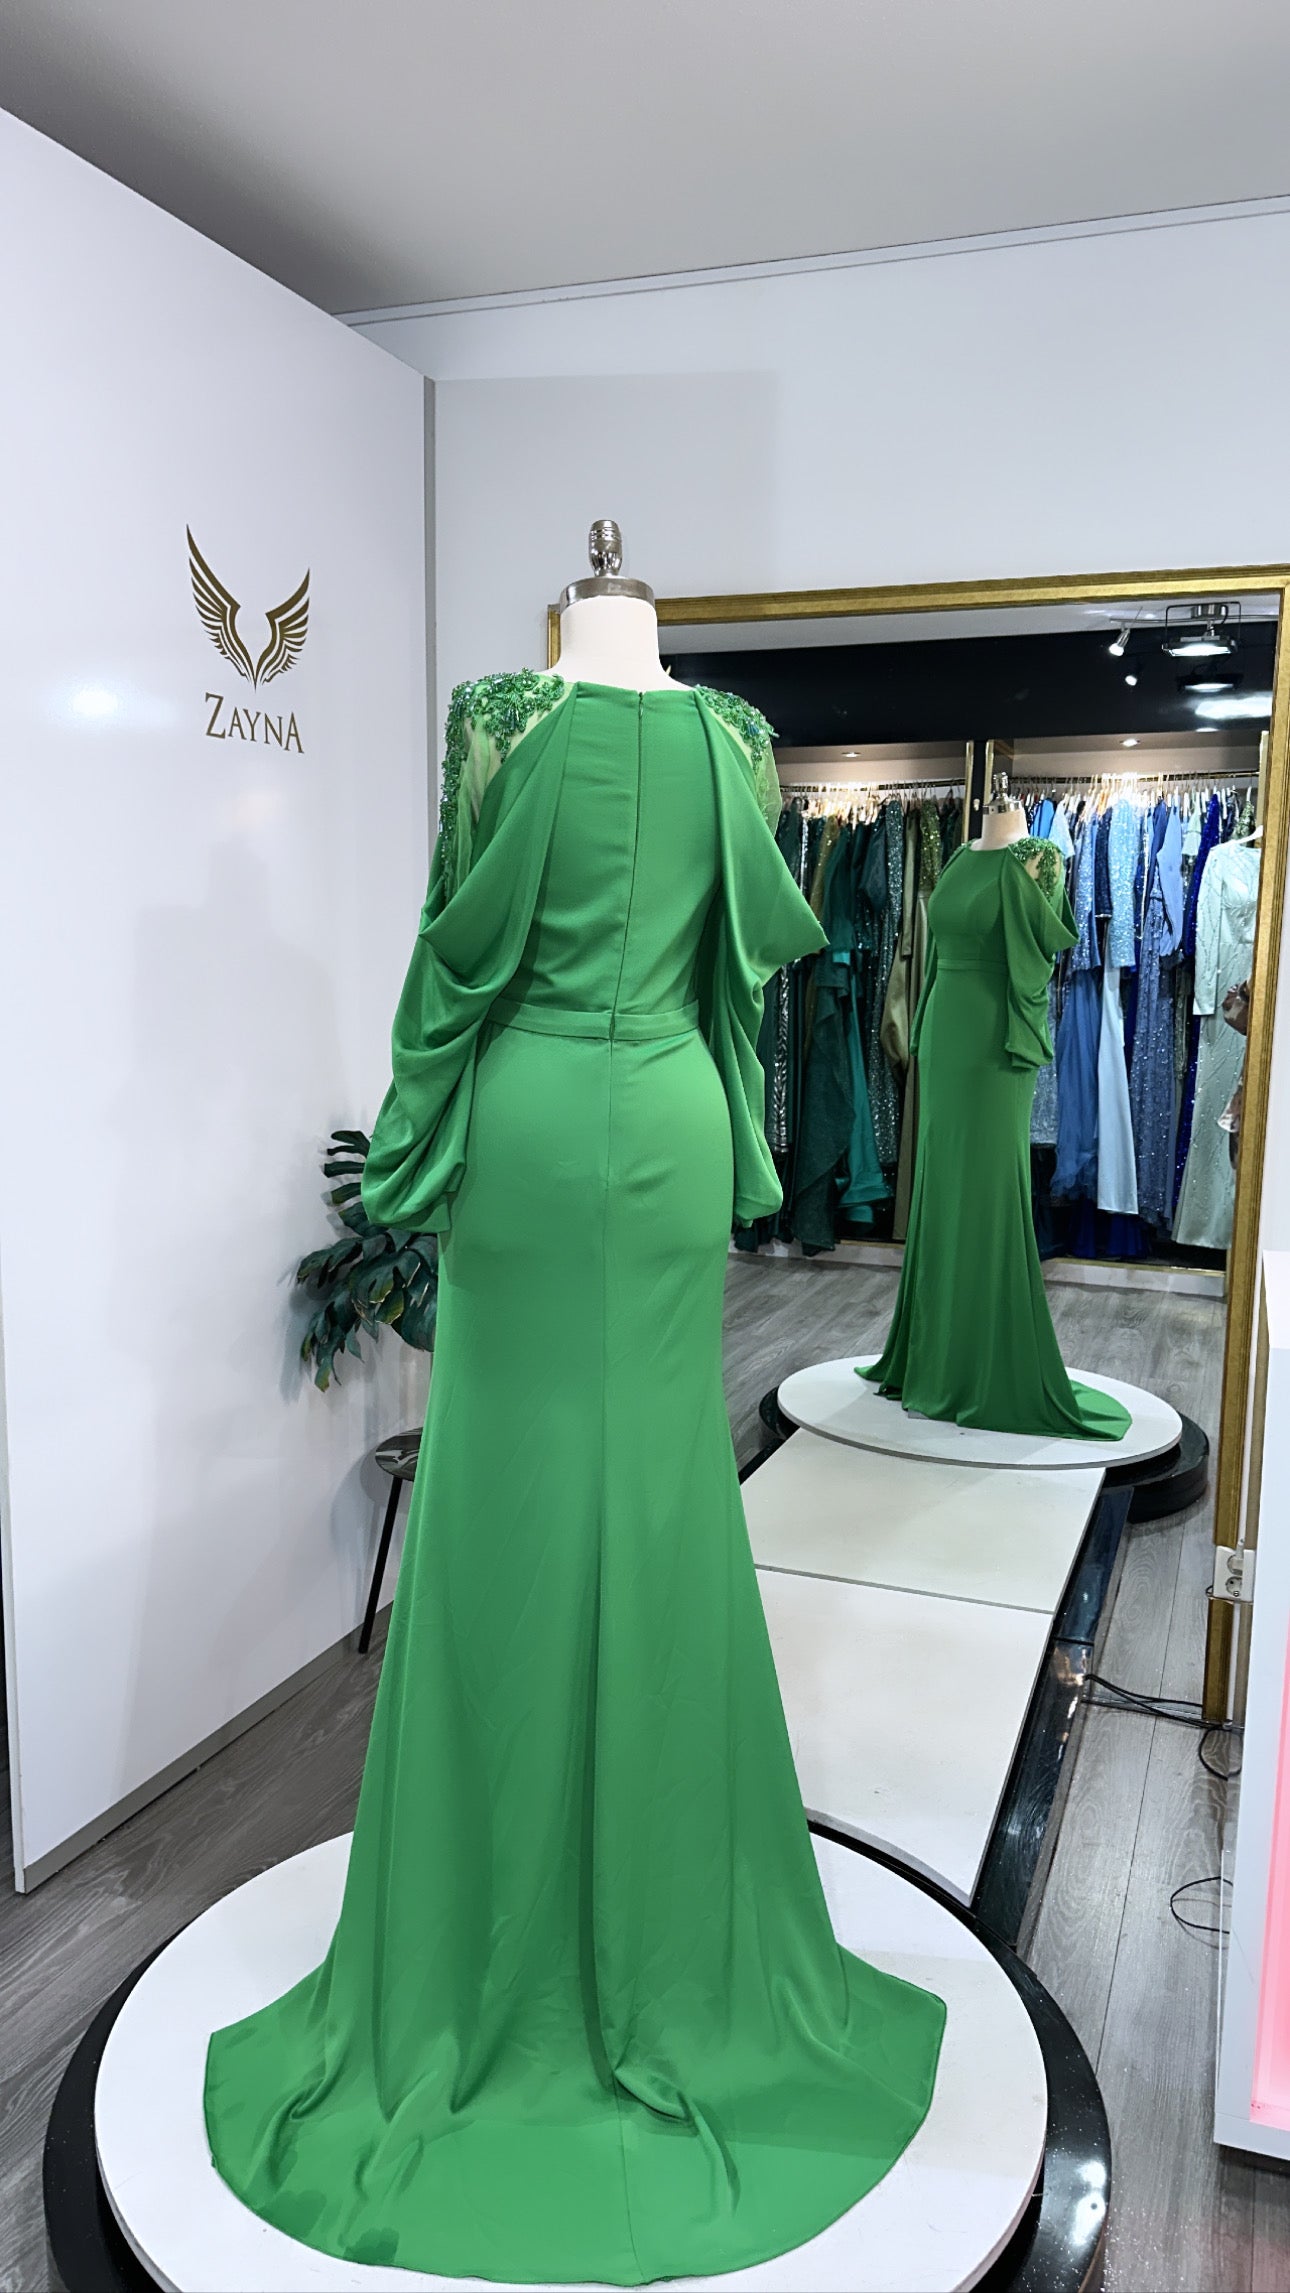 Elegant green dress decorated at the sleeves, split